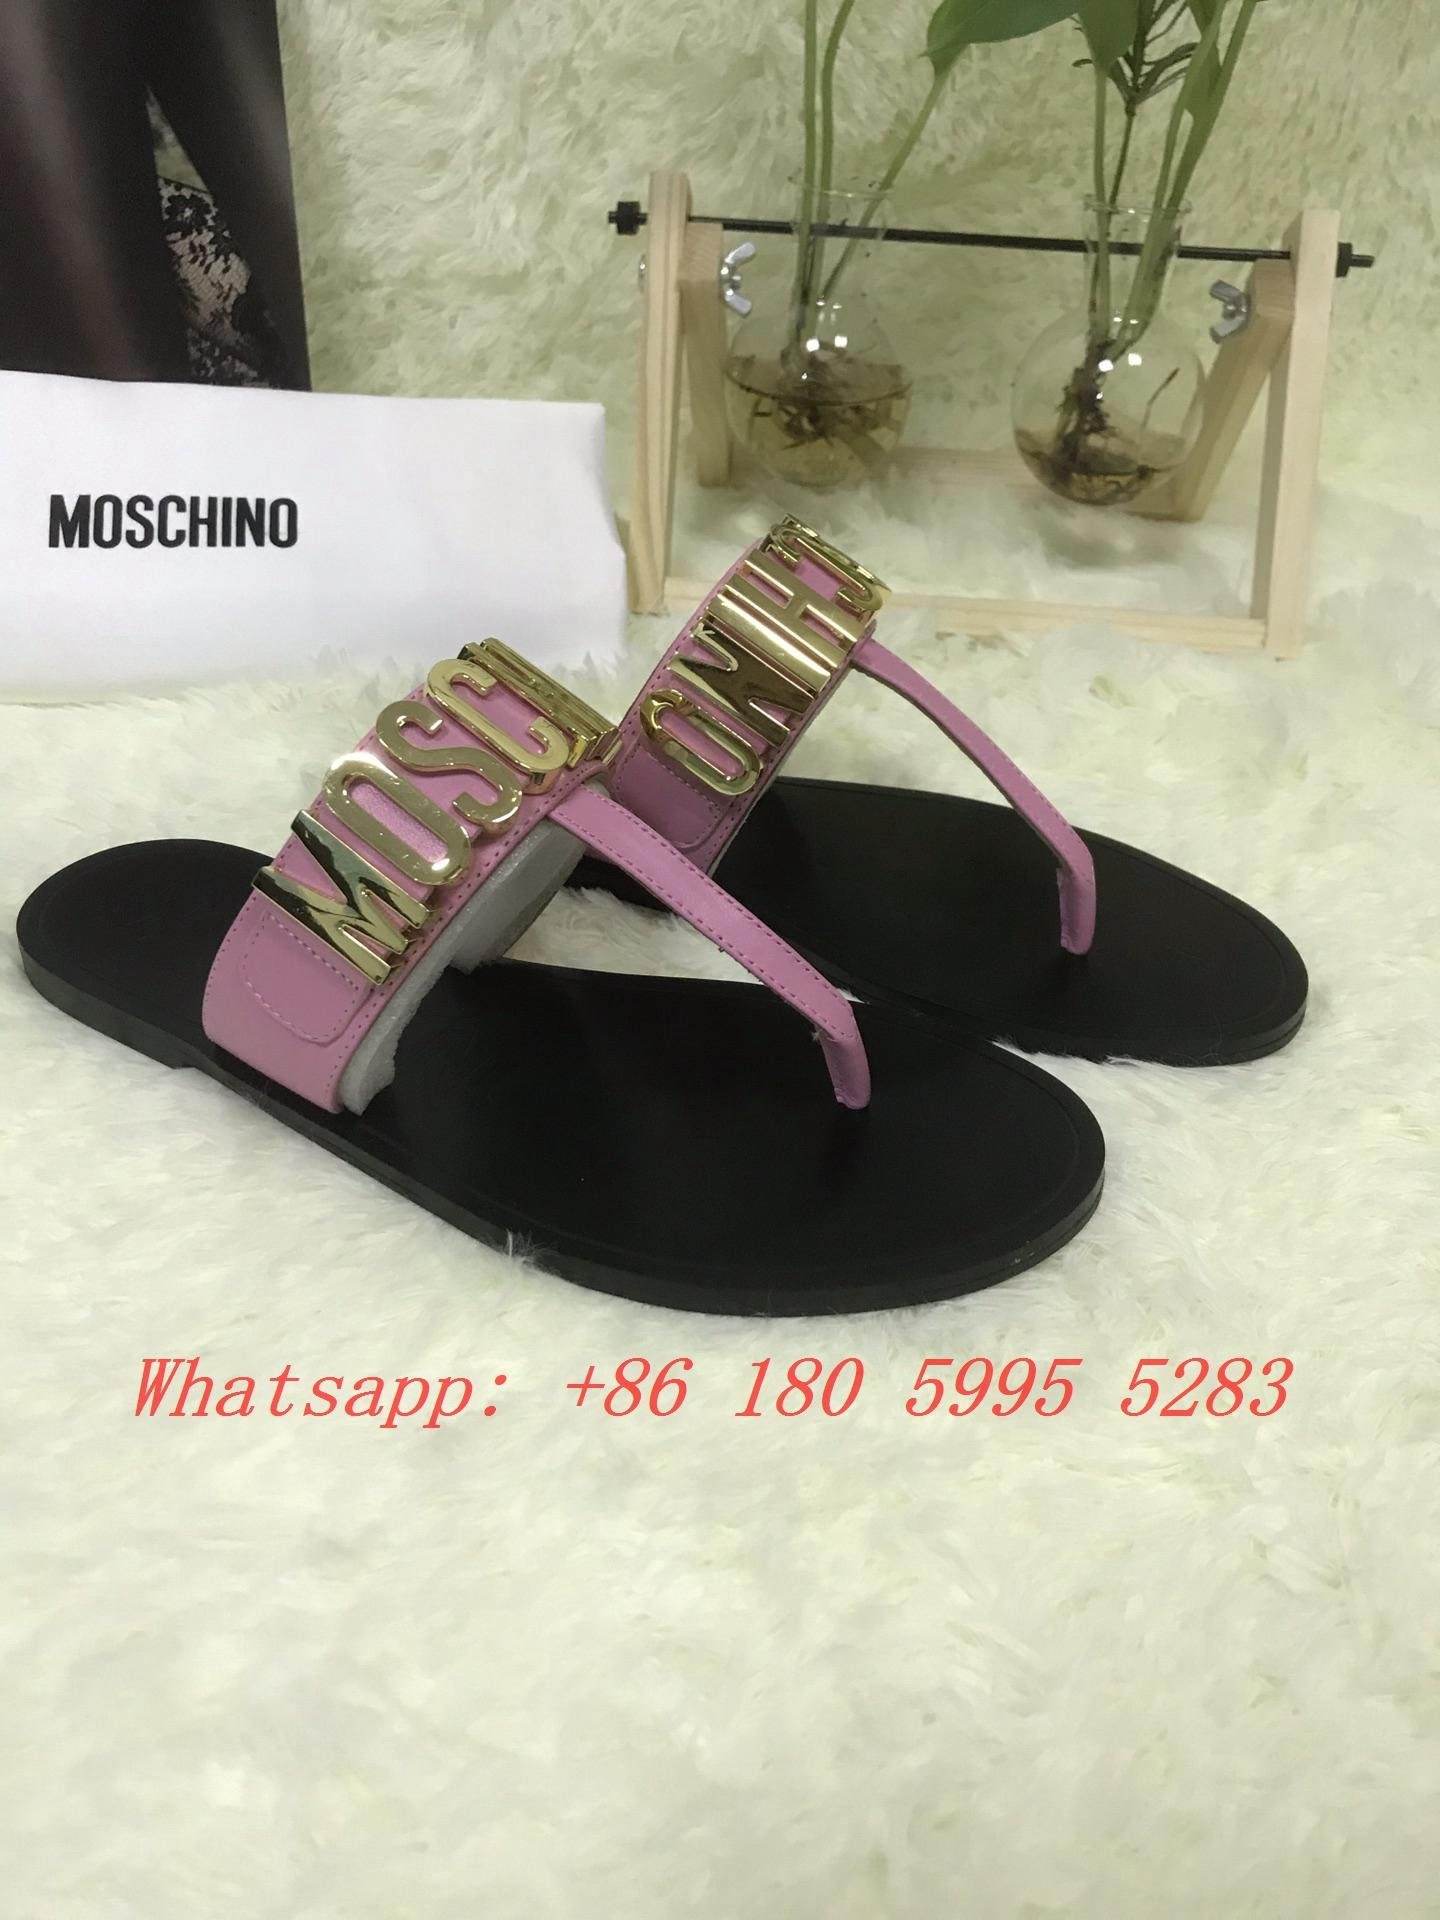 2022 Hot Sale Moschino Sandals Women's Leather POOL SLIDES IN PVC LETTERING LOGO Slippers